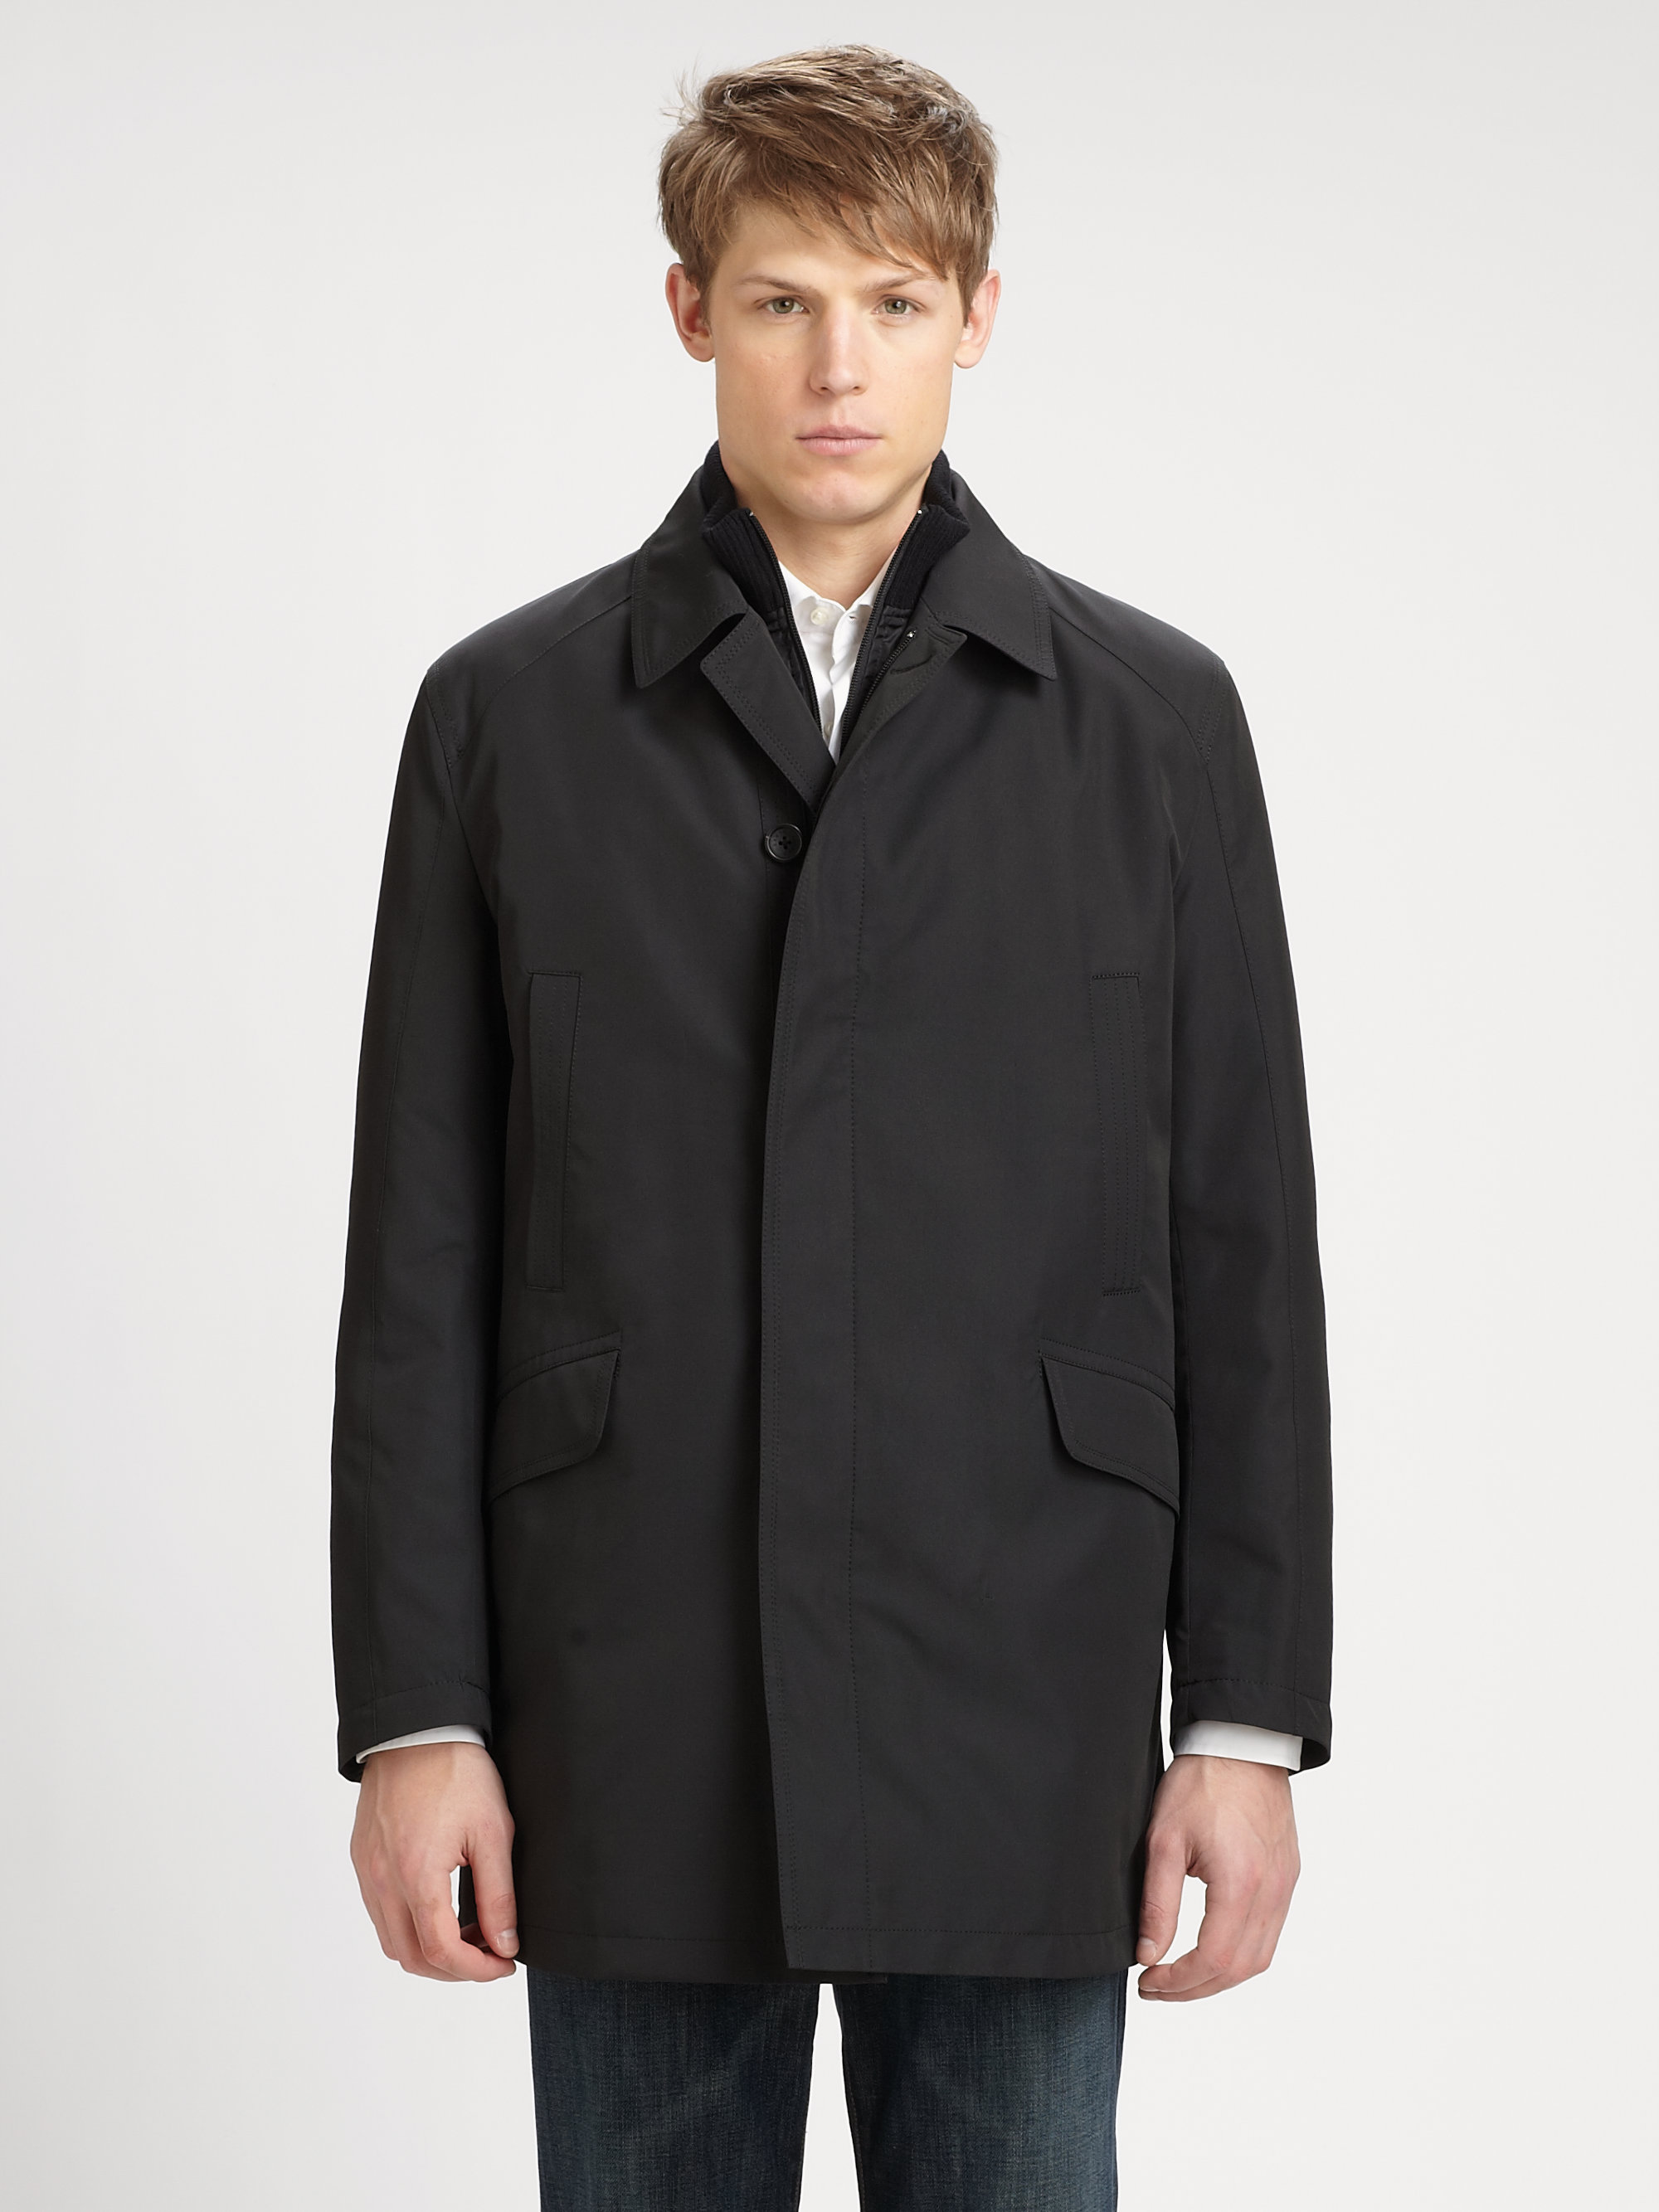 Lyst - Sanyo Crosby Outer Coat in Black for Men